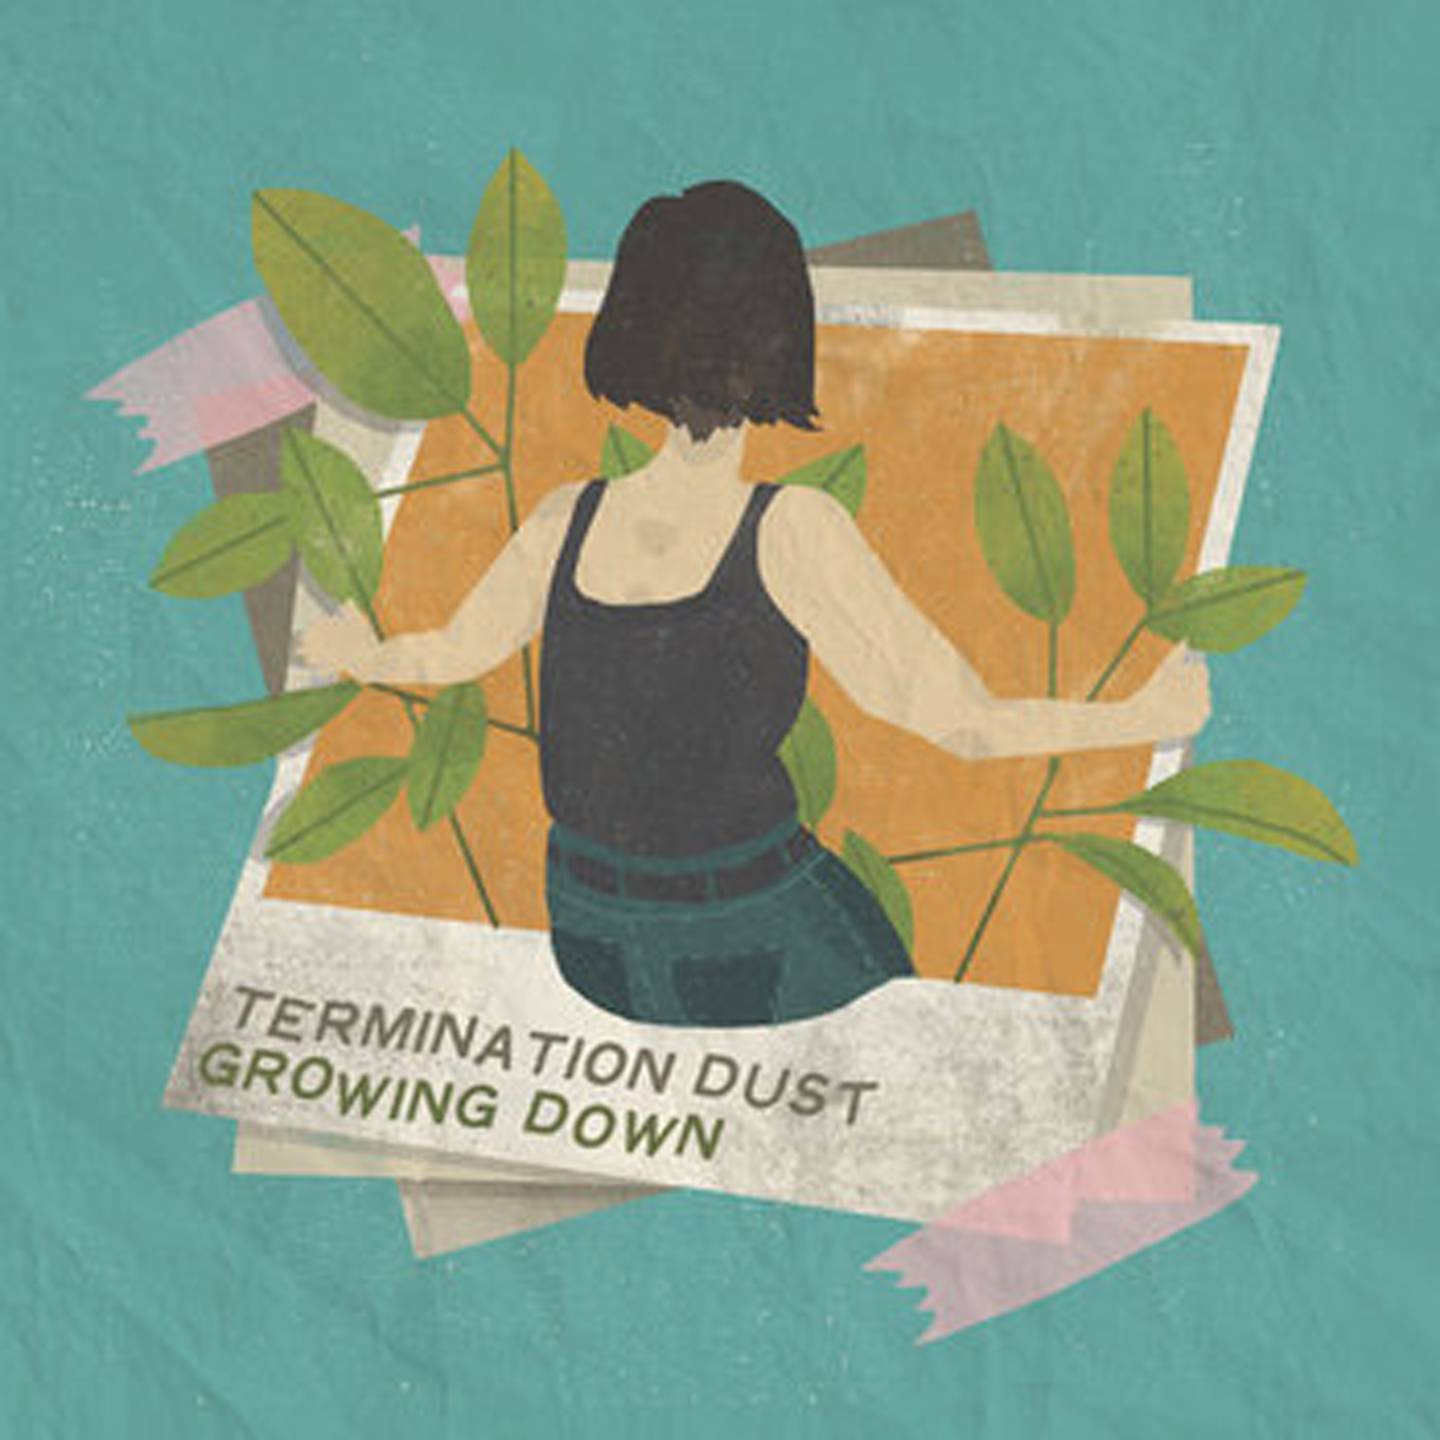 "Growing Down" Termination Dust